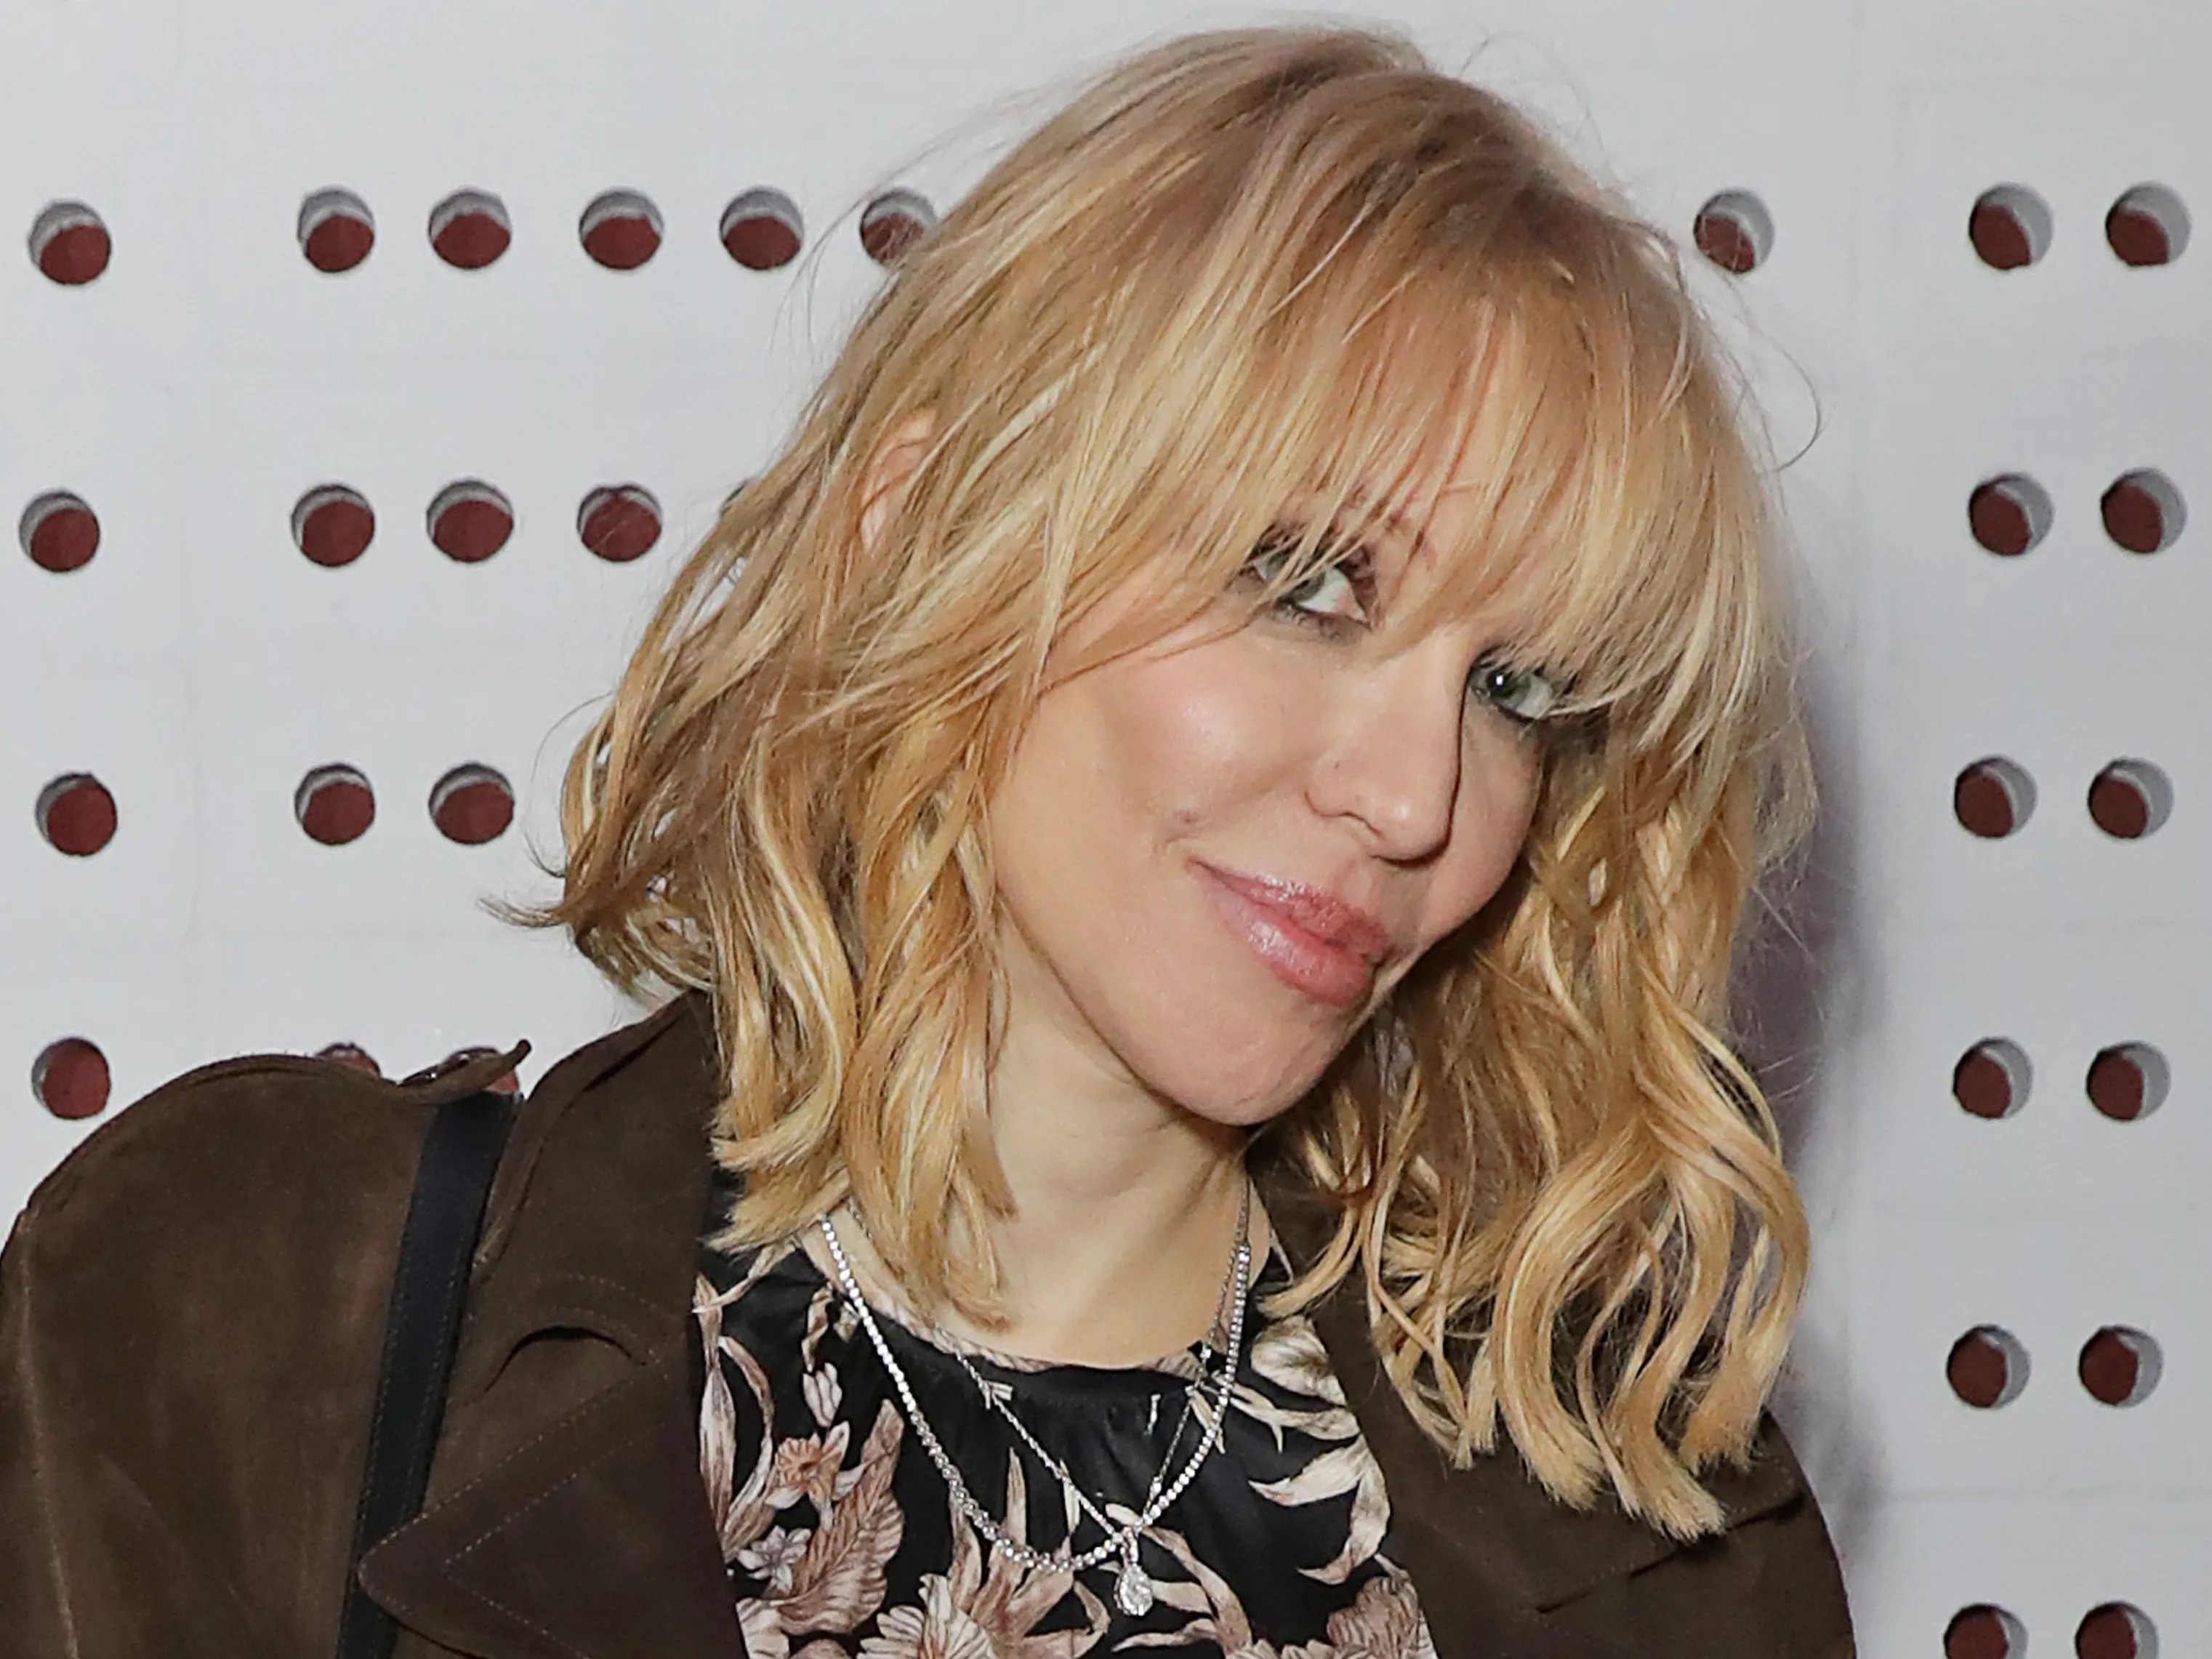 Celebrities Are Deceived by Relatives, Courtney Love